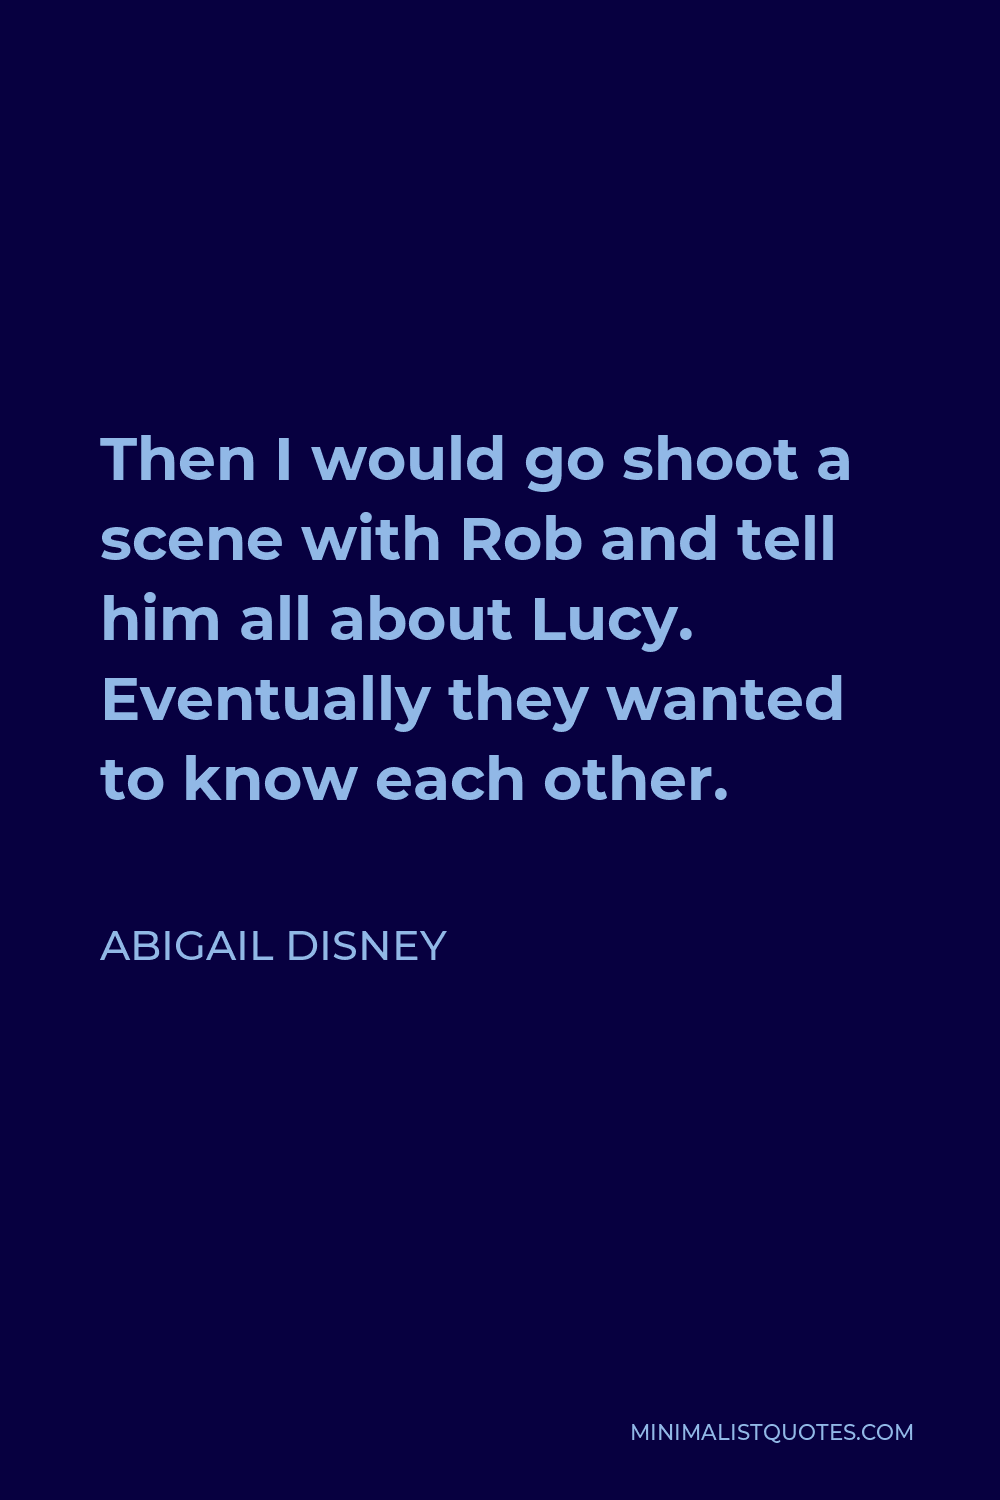 Abigail Disney Quote - Then I would go shoot a scene with Rob and tell him all about Lucy. Eventually they wanted to know each other.